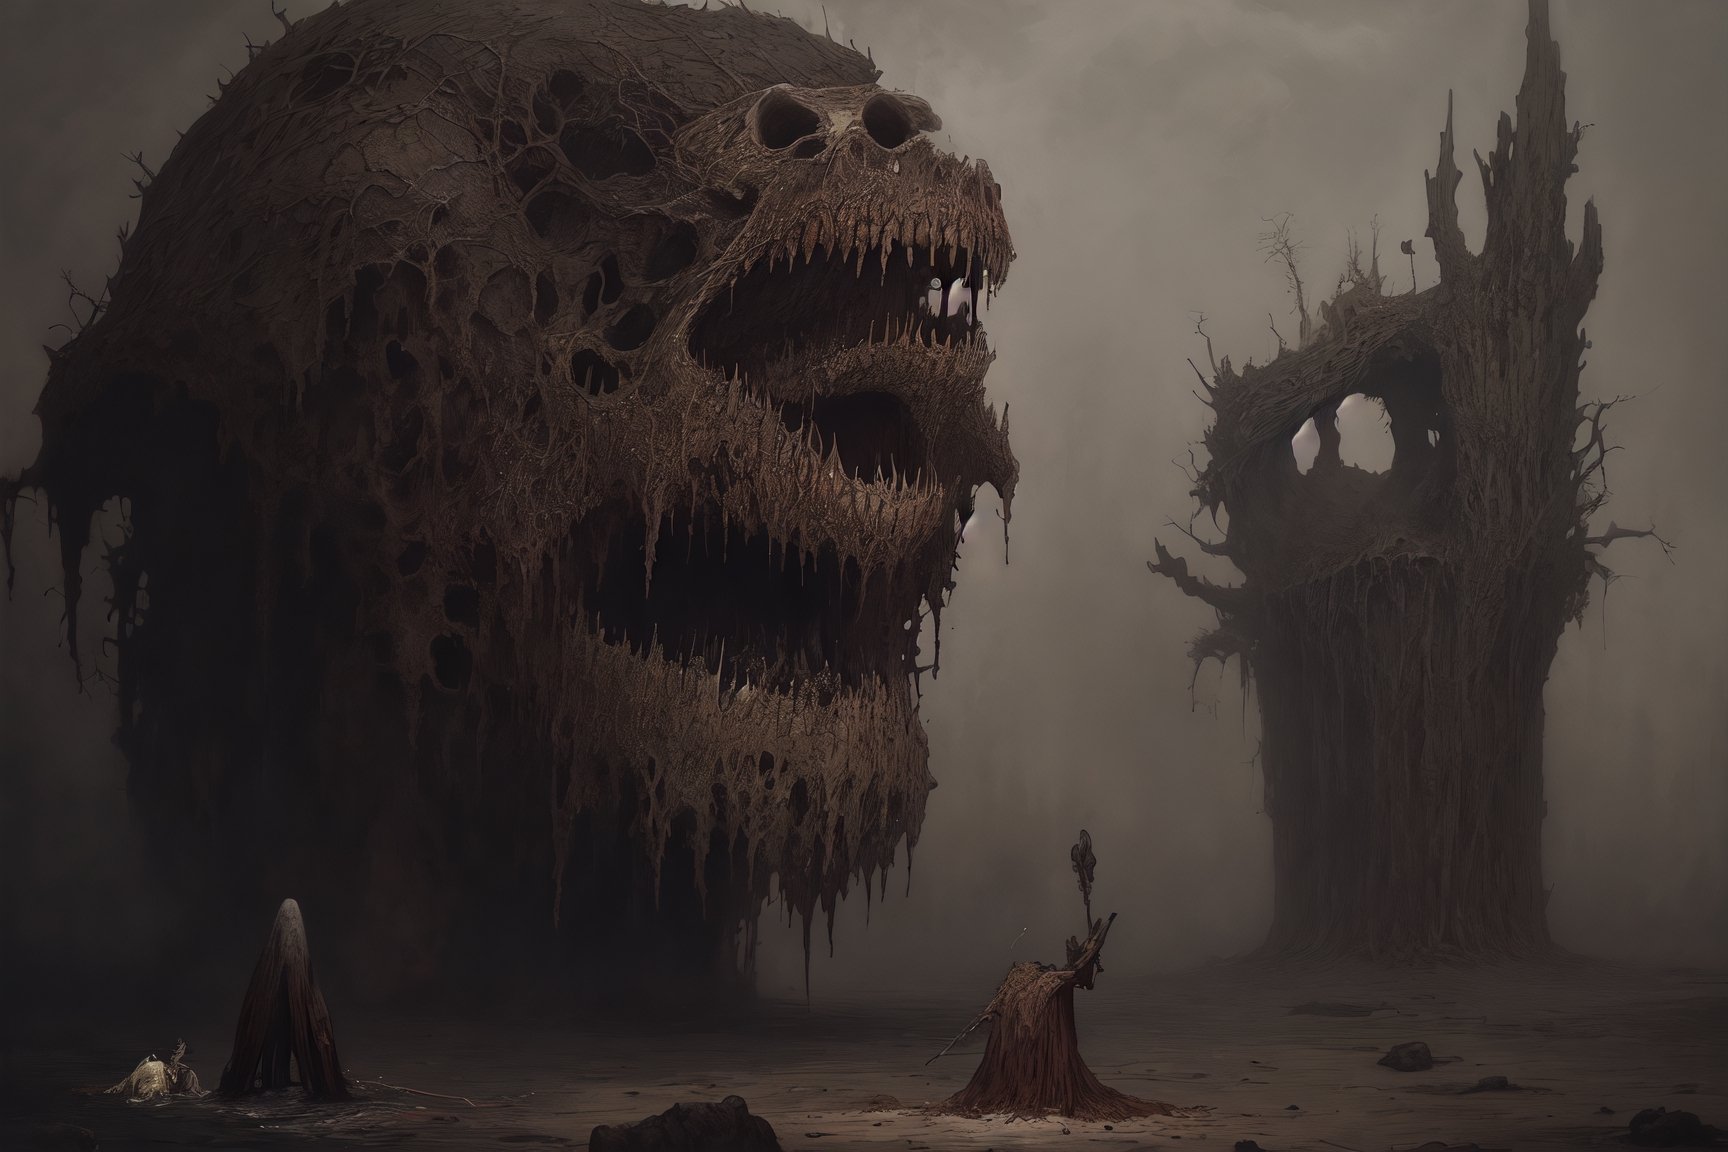 Painting made by Zdzislaw Beksinski, david and goliath, hollow one, masterpiece, megalophobia, acid trip, unsettling feel, oil painting on hardboard, sepia colors, fear of unknown